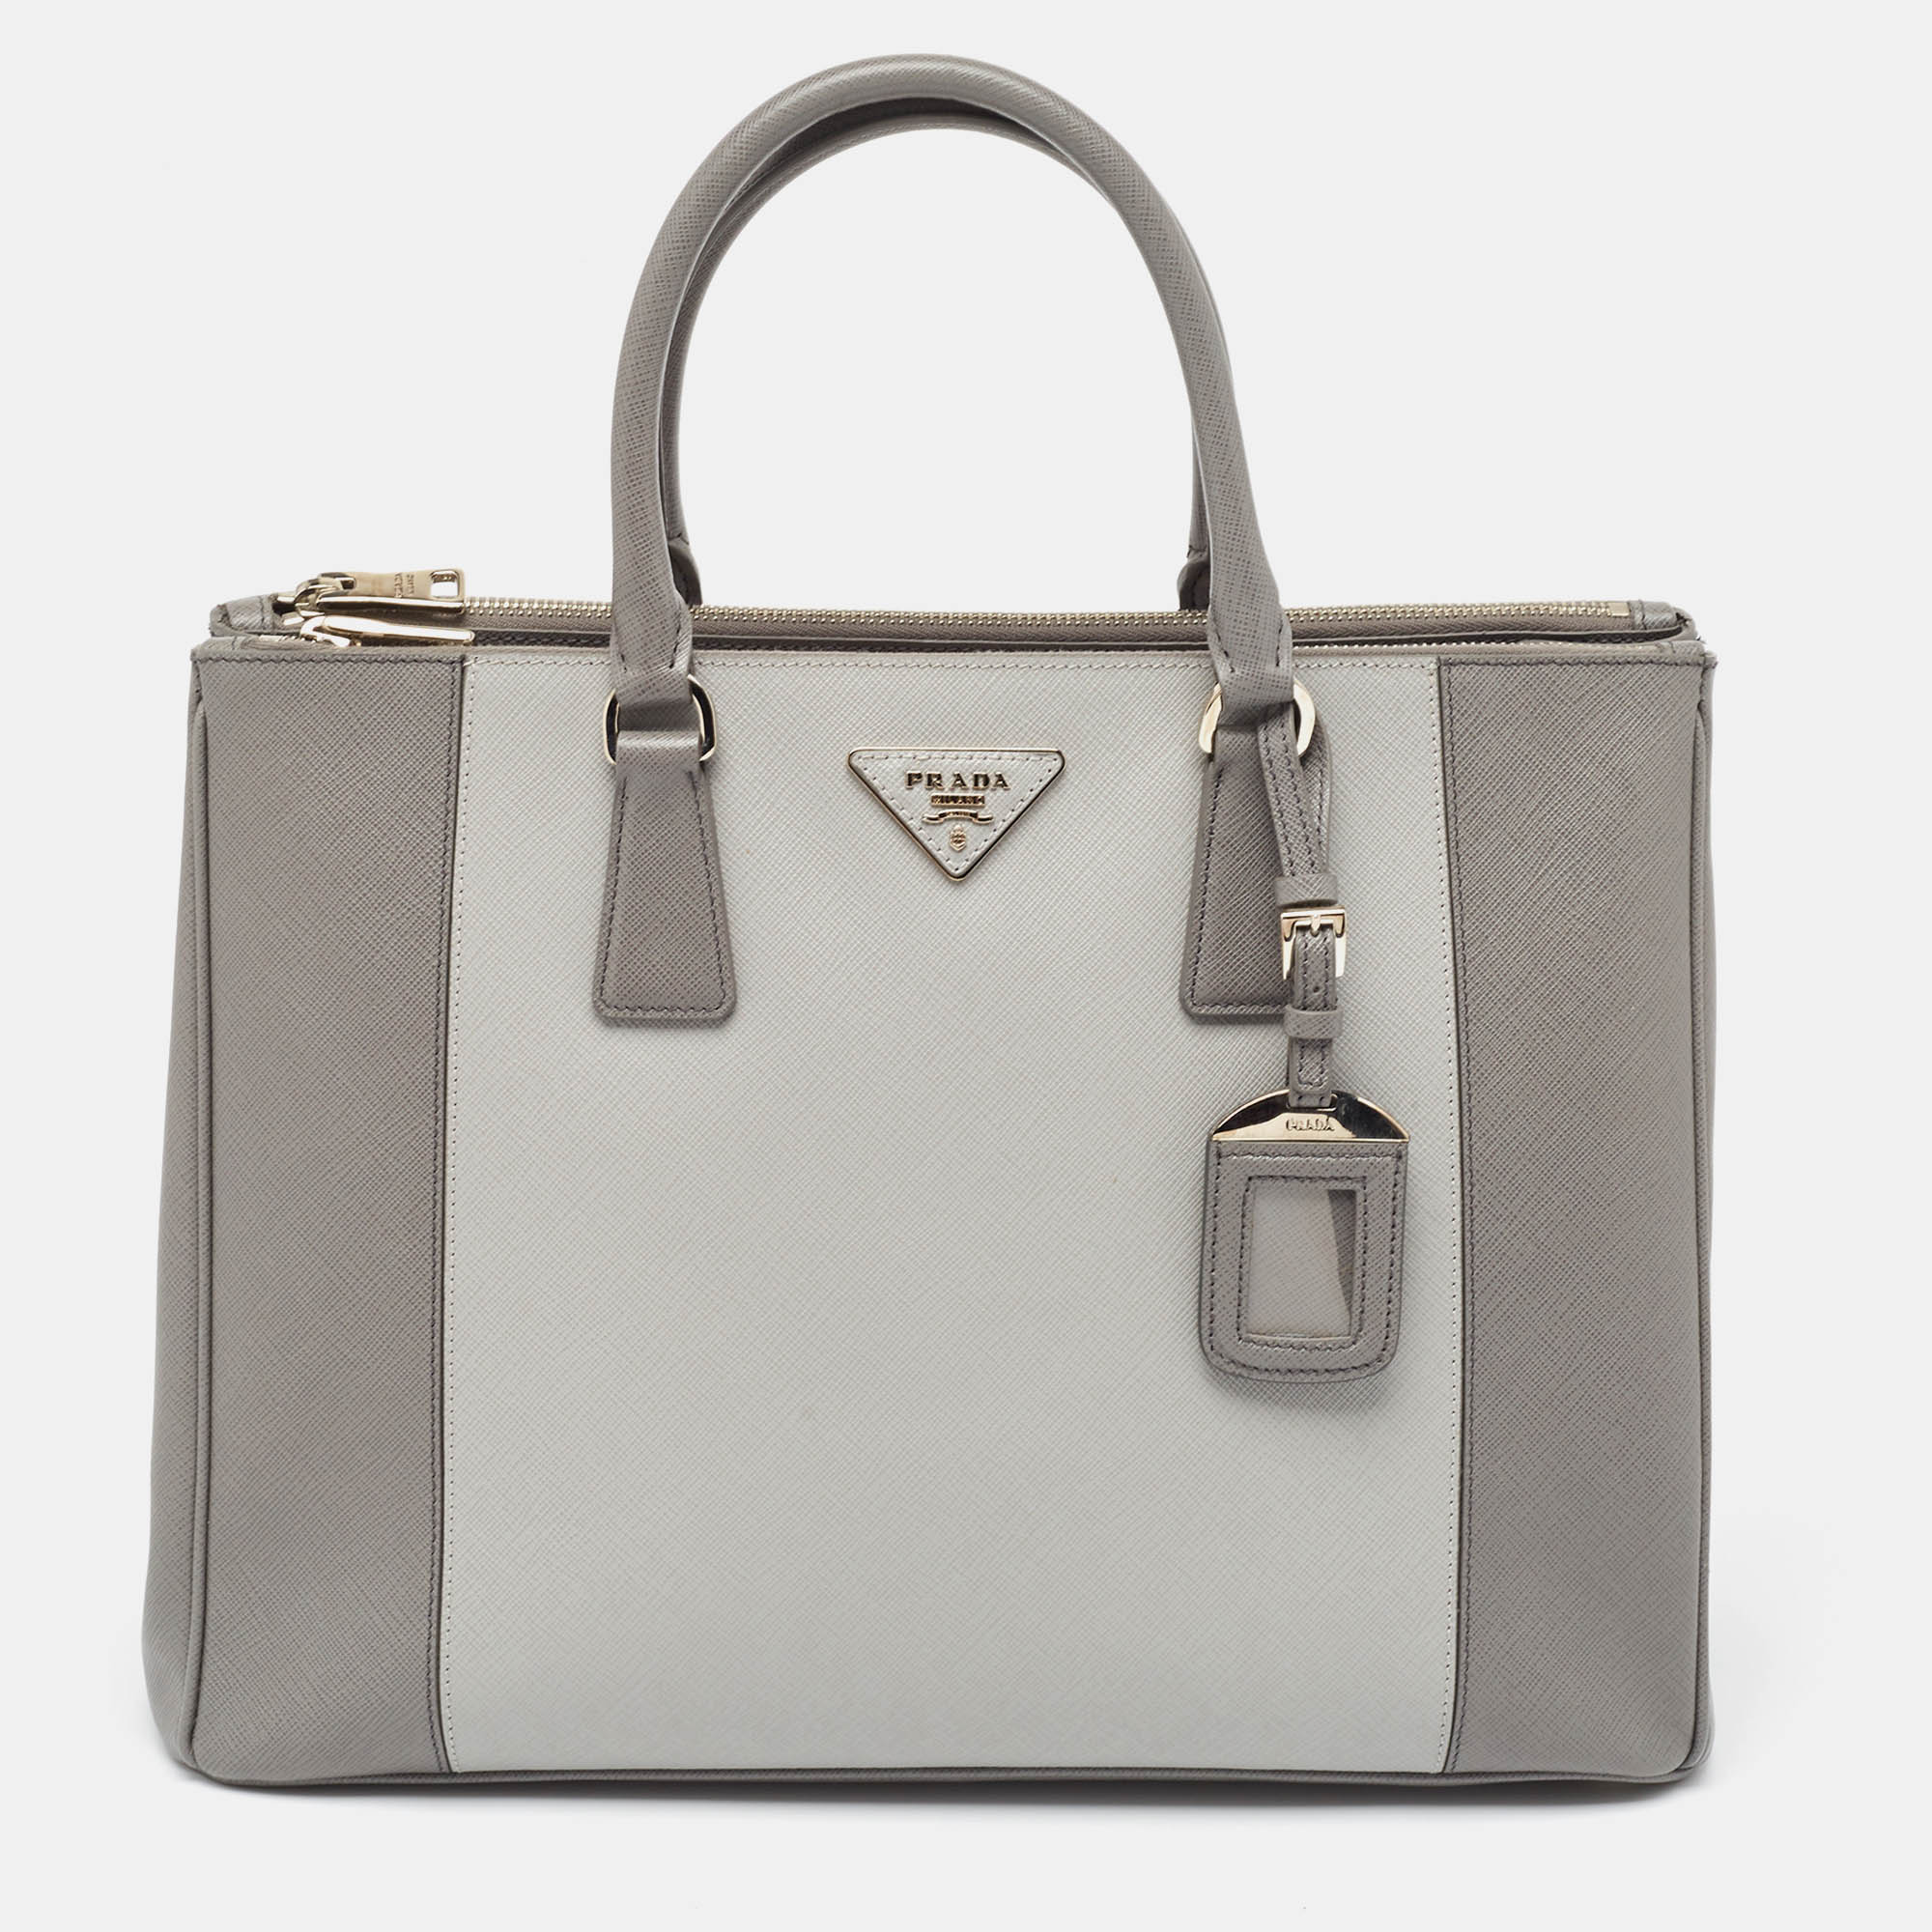 Pre-owned Prada Two Tone Grey Saffiano Leather Large Double Zip Tote